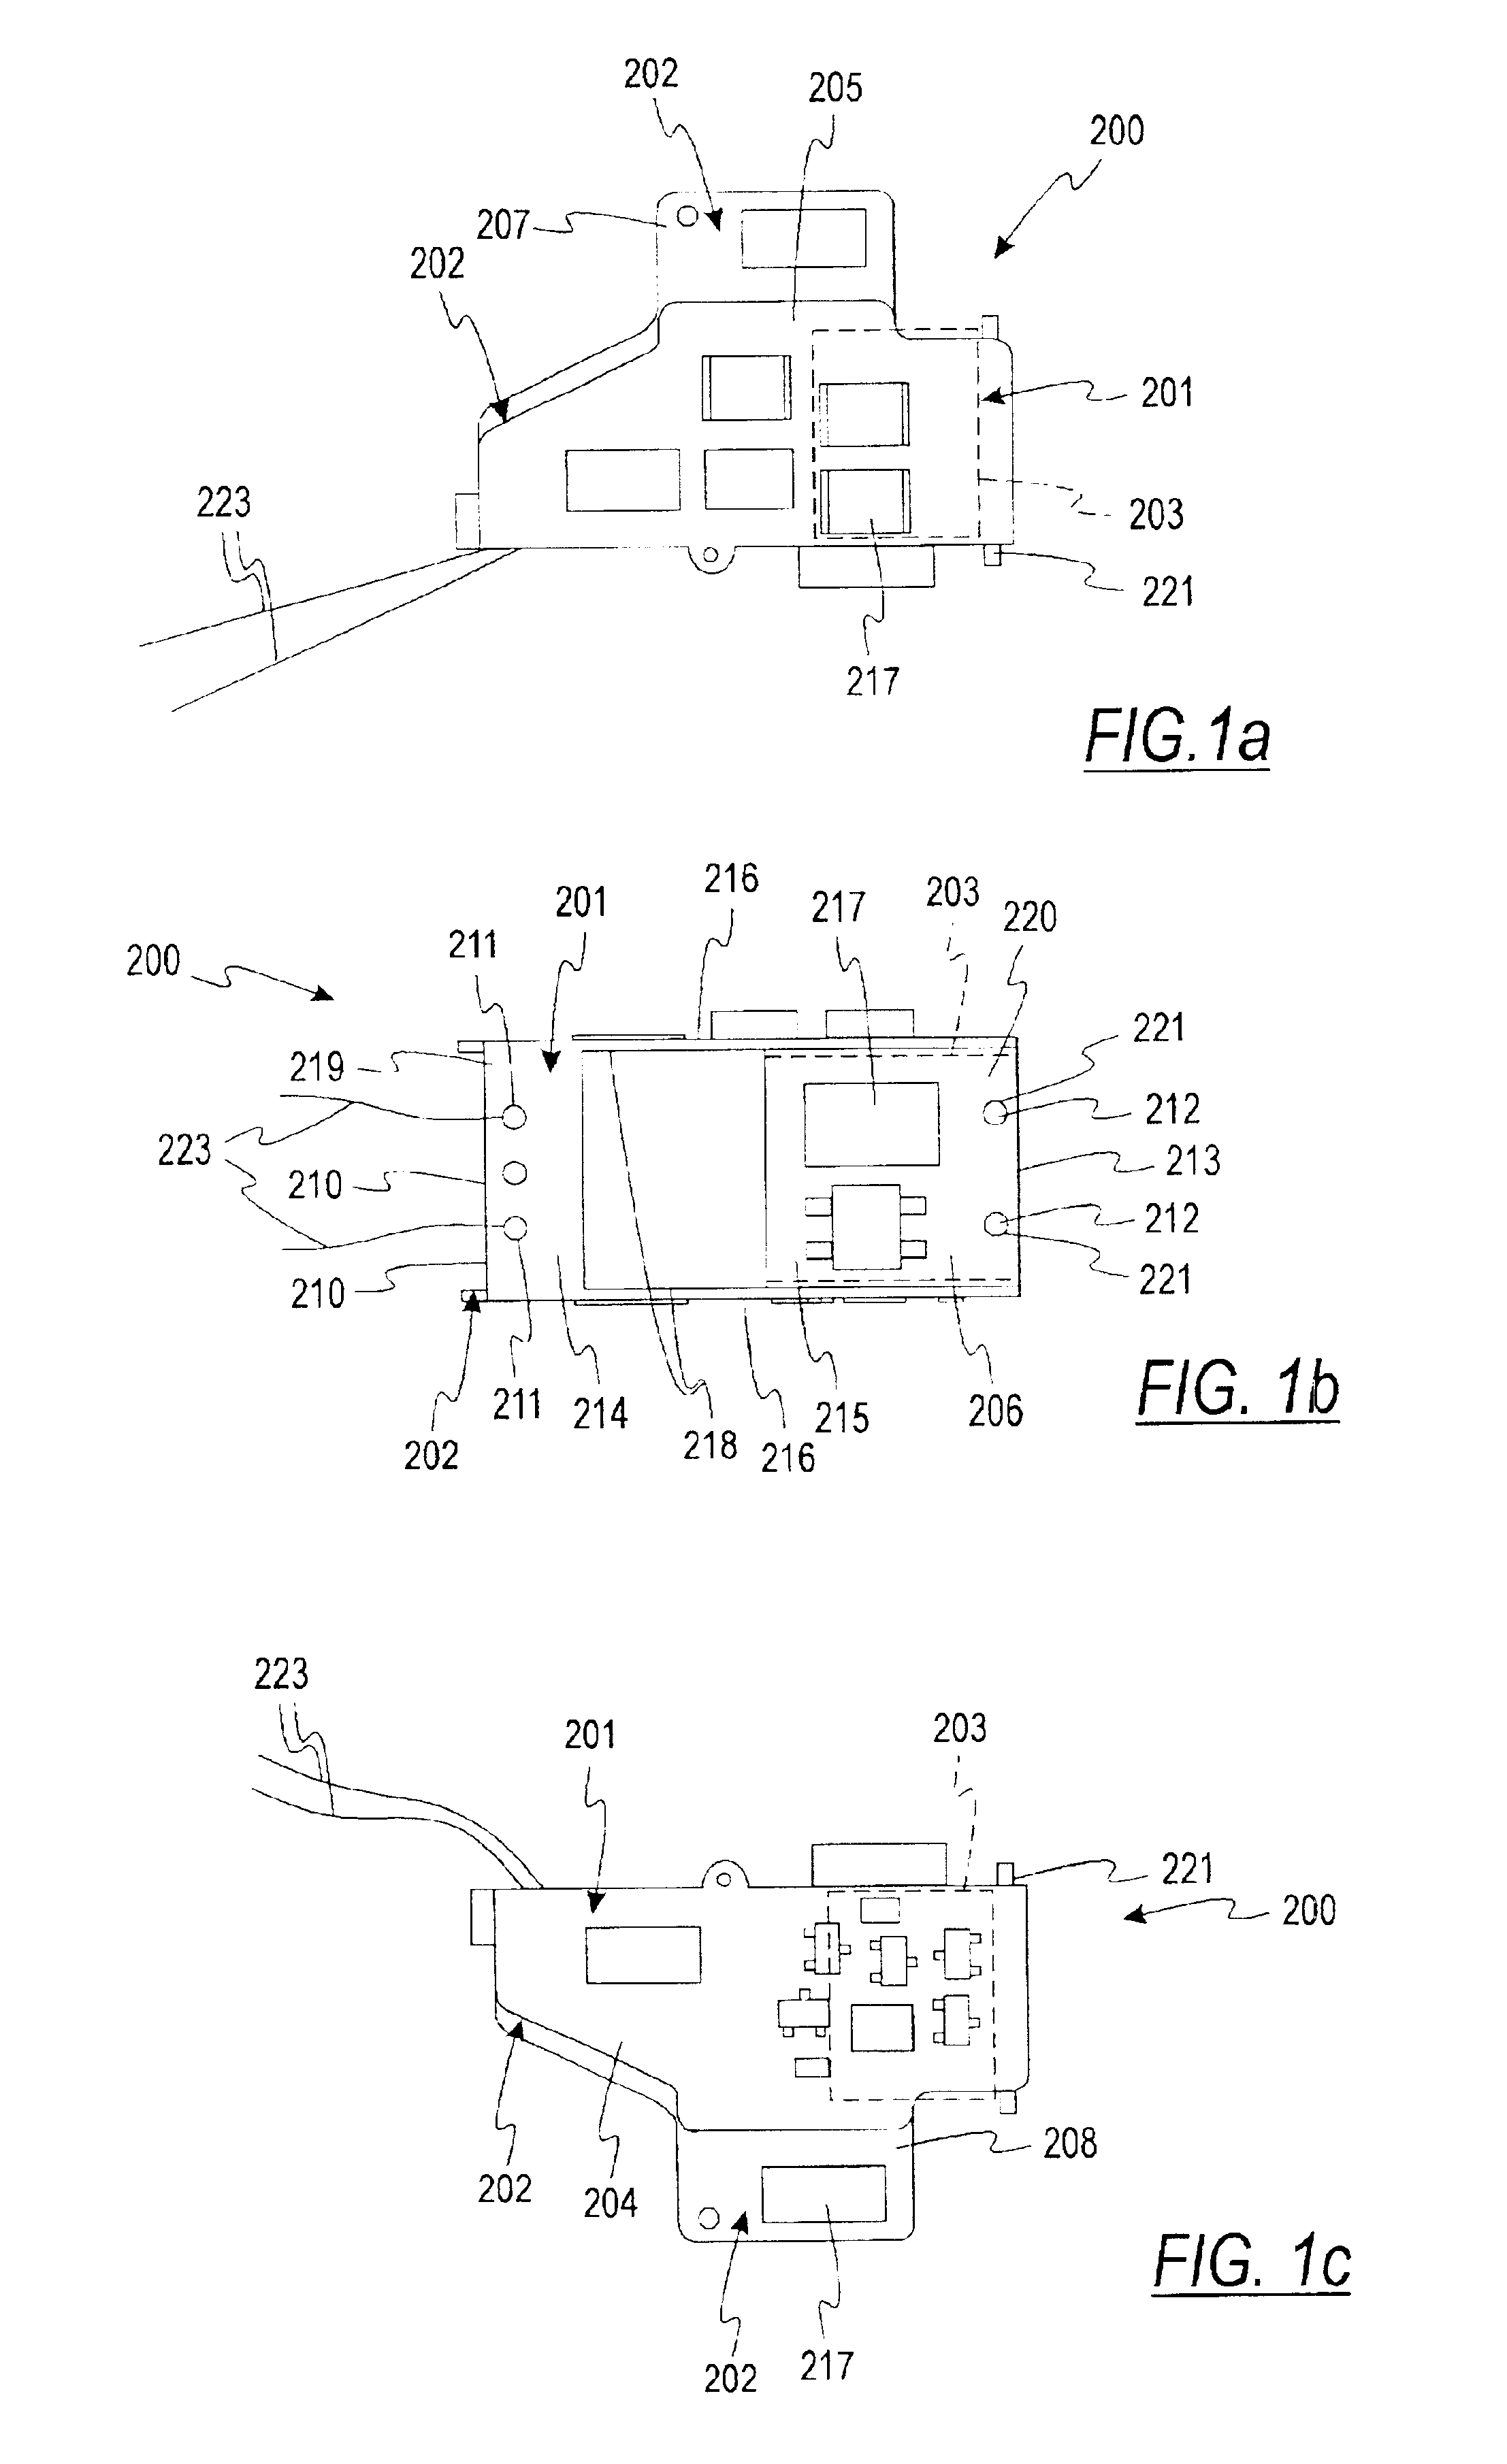 Flexible circuit adhered to metal frame of device